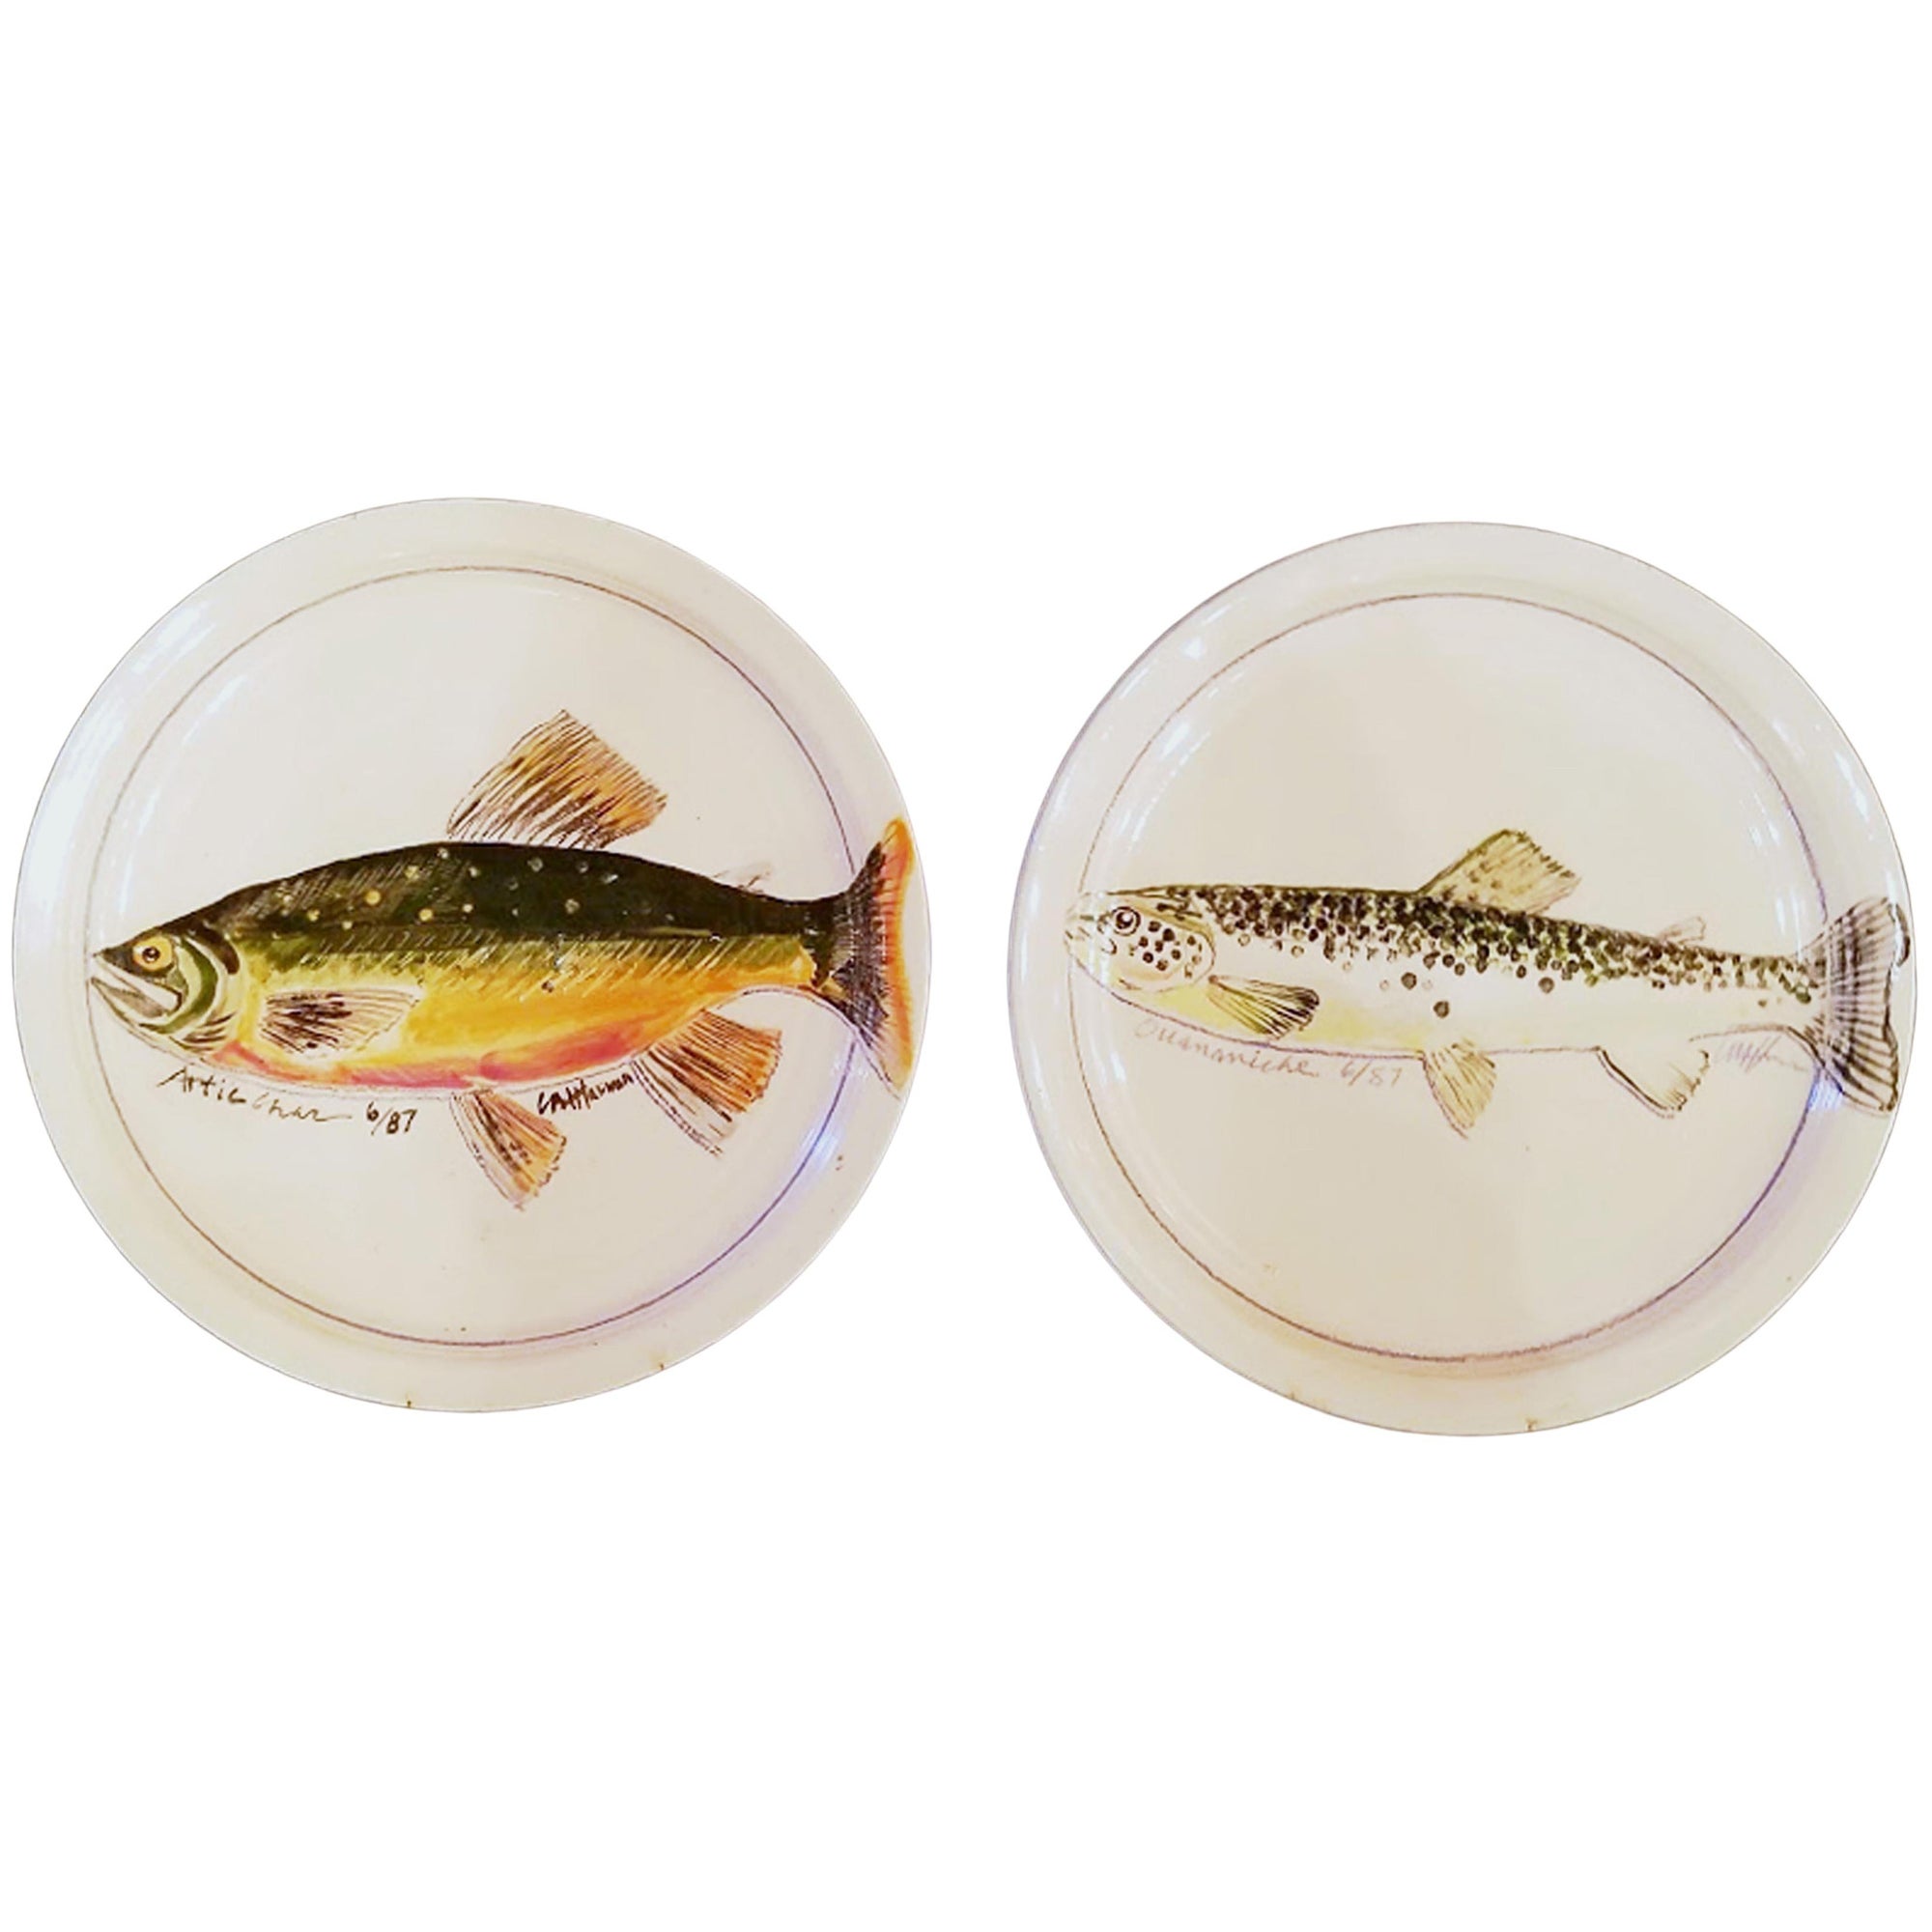 Carole Harman Ceramic Dishes Painted with Fish, Arctic Char & Ouananiche Salmon For Sale